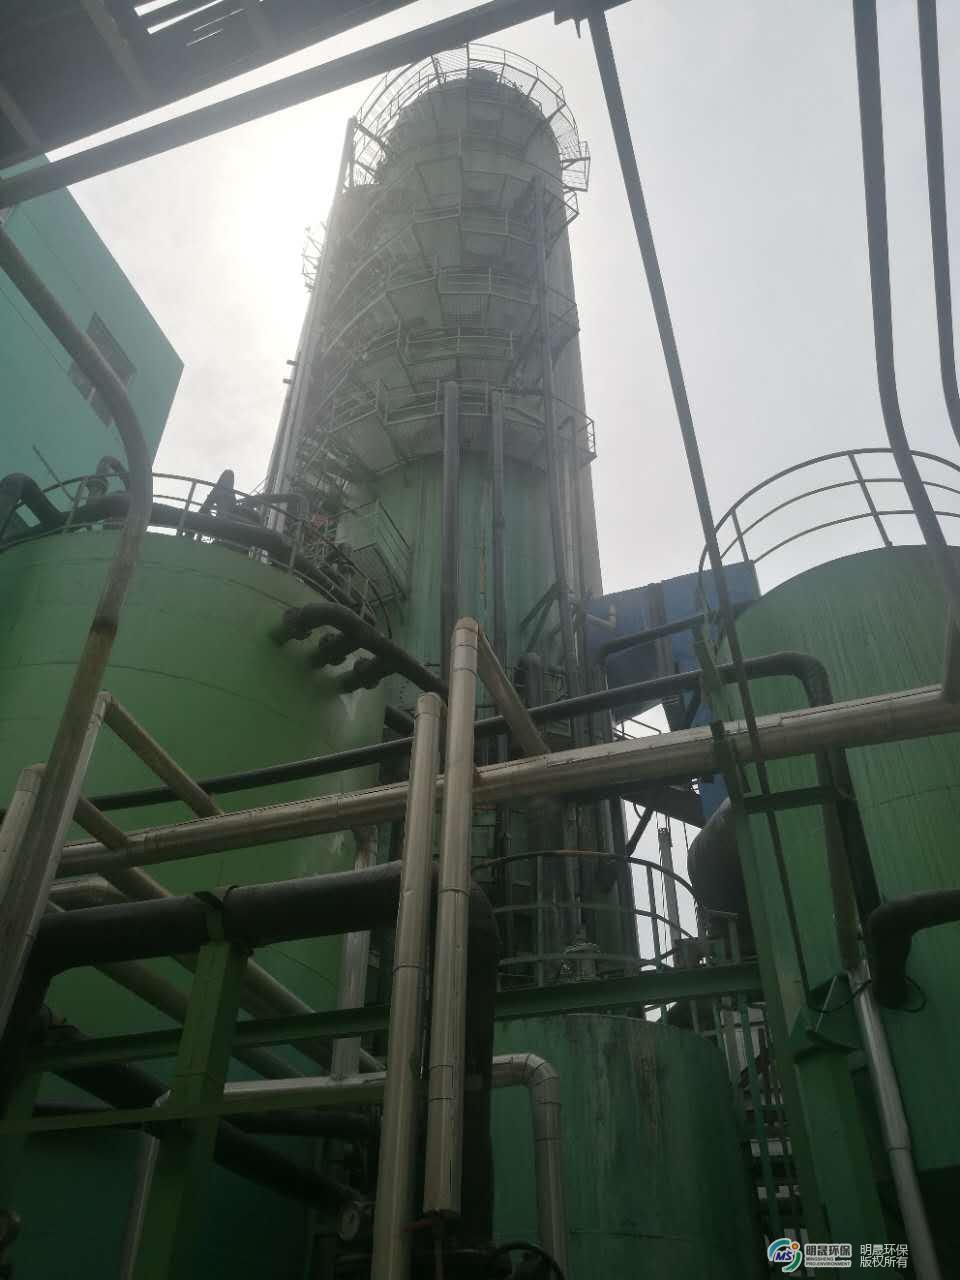 Flue gas ammonia desulphurization and dust removal project of CNOOC calciner